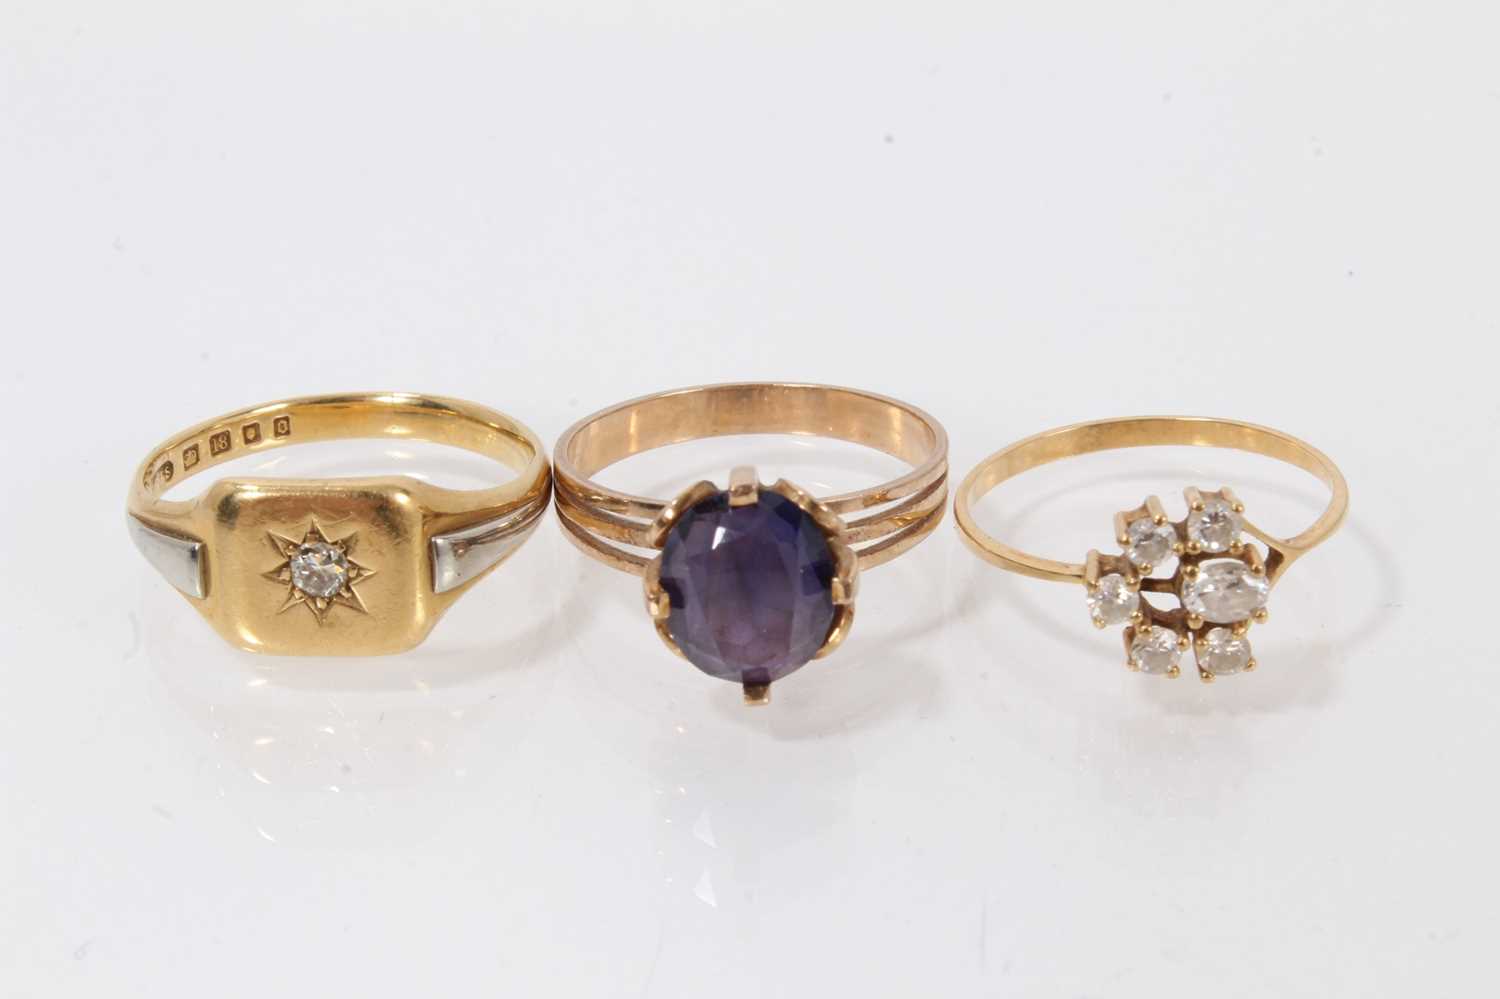 18ct gold signet ring, two gold dress rings and two pairs of earrings - Image 2 of 3